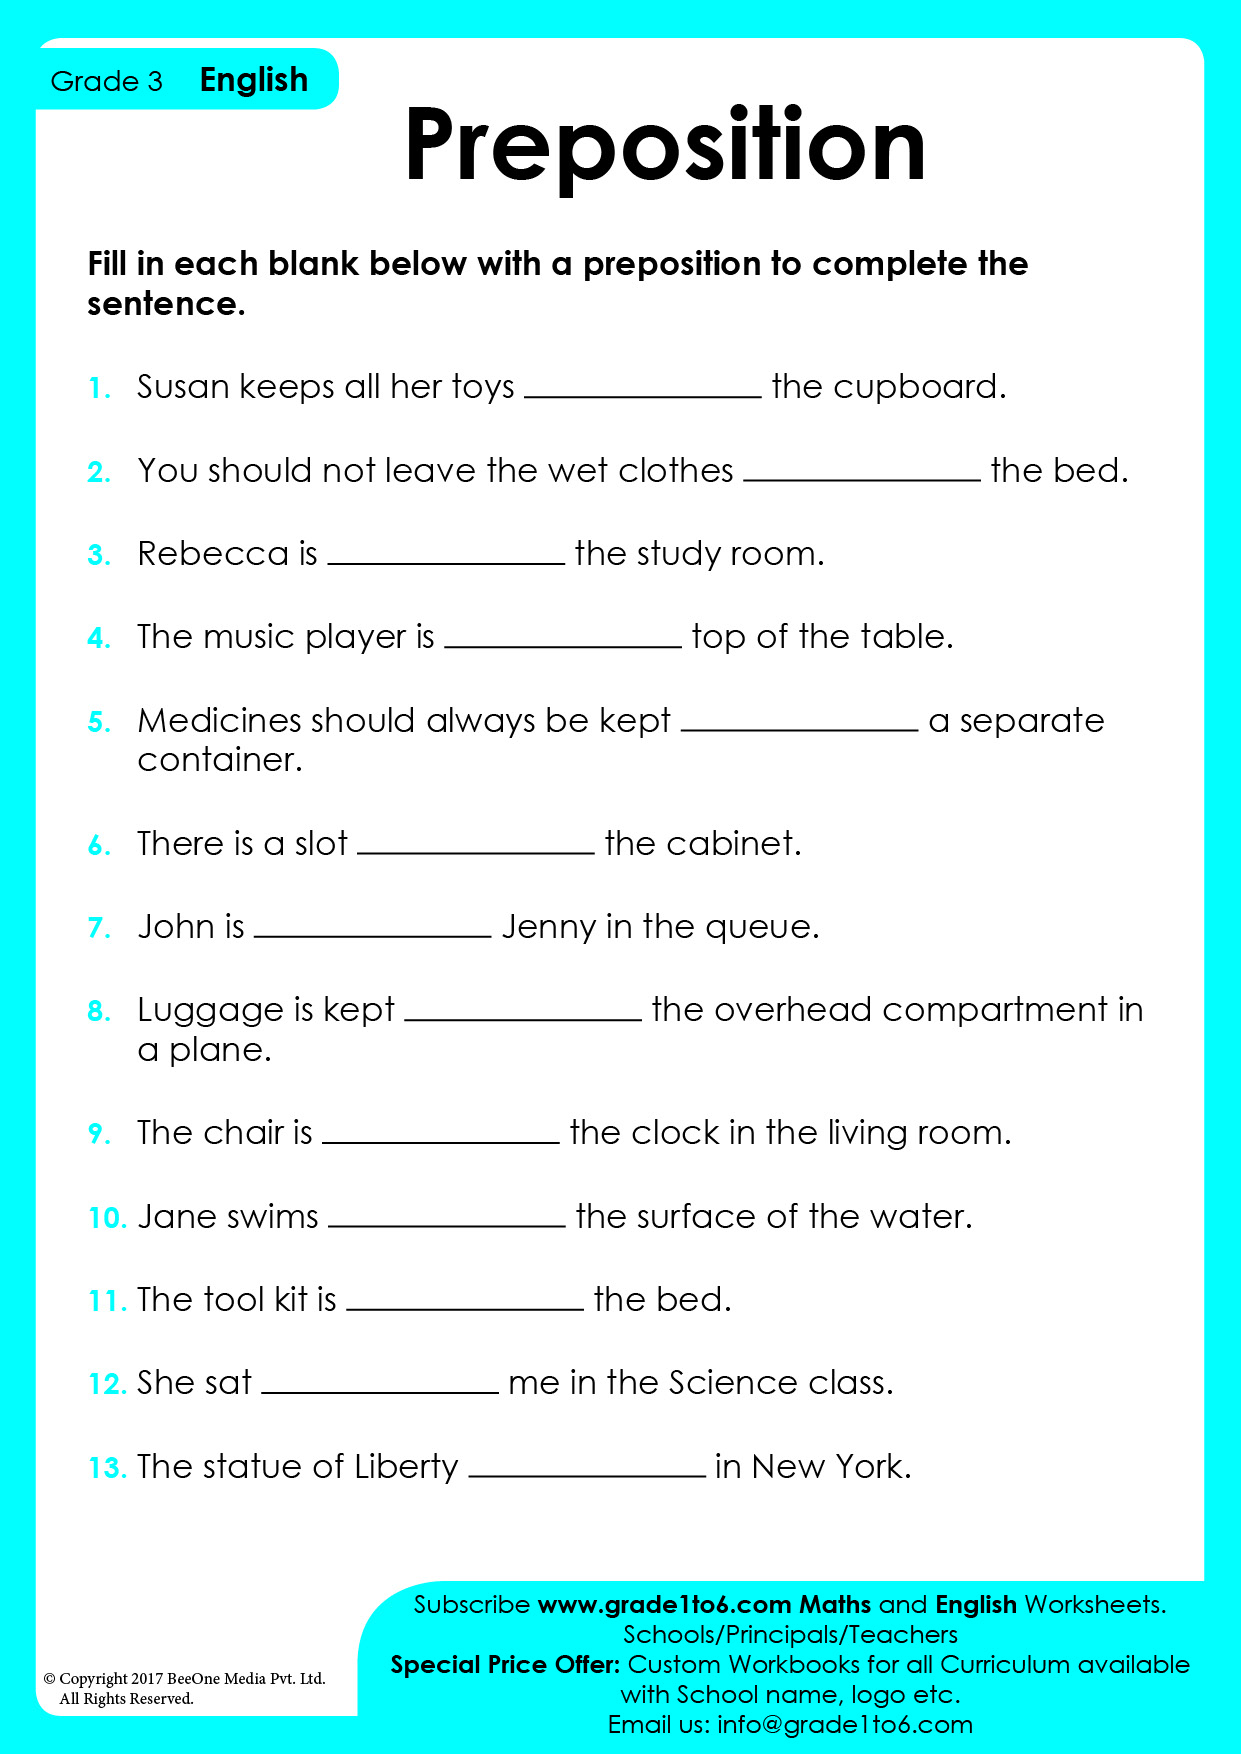 preposition-worksheets-for-class-3-grade1to6